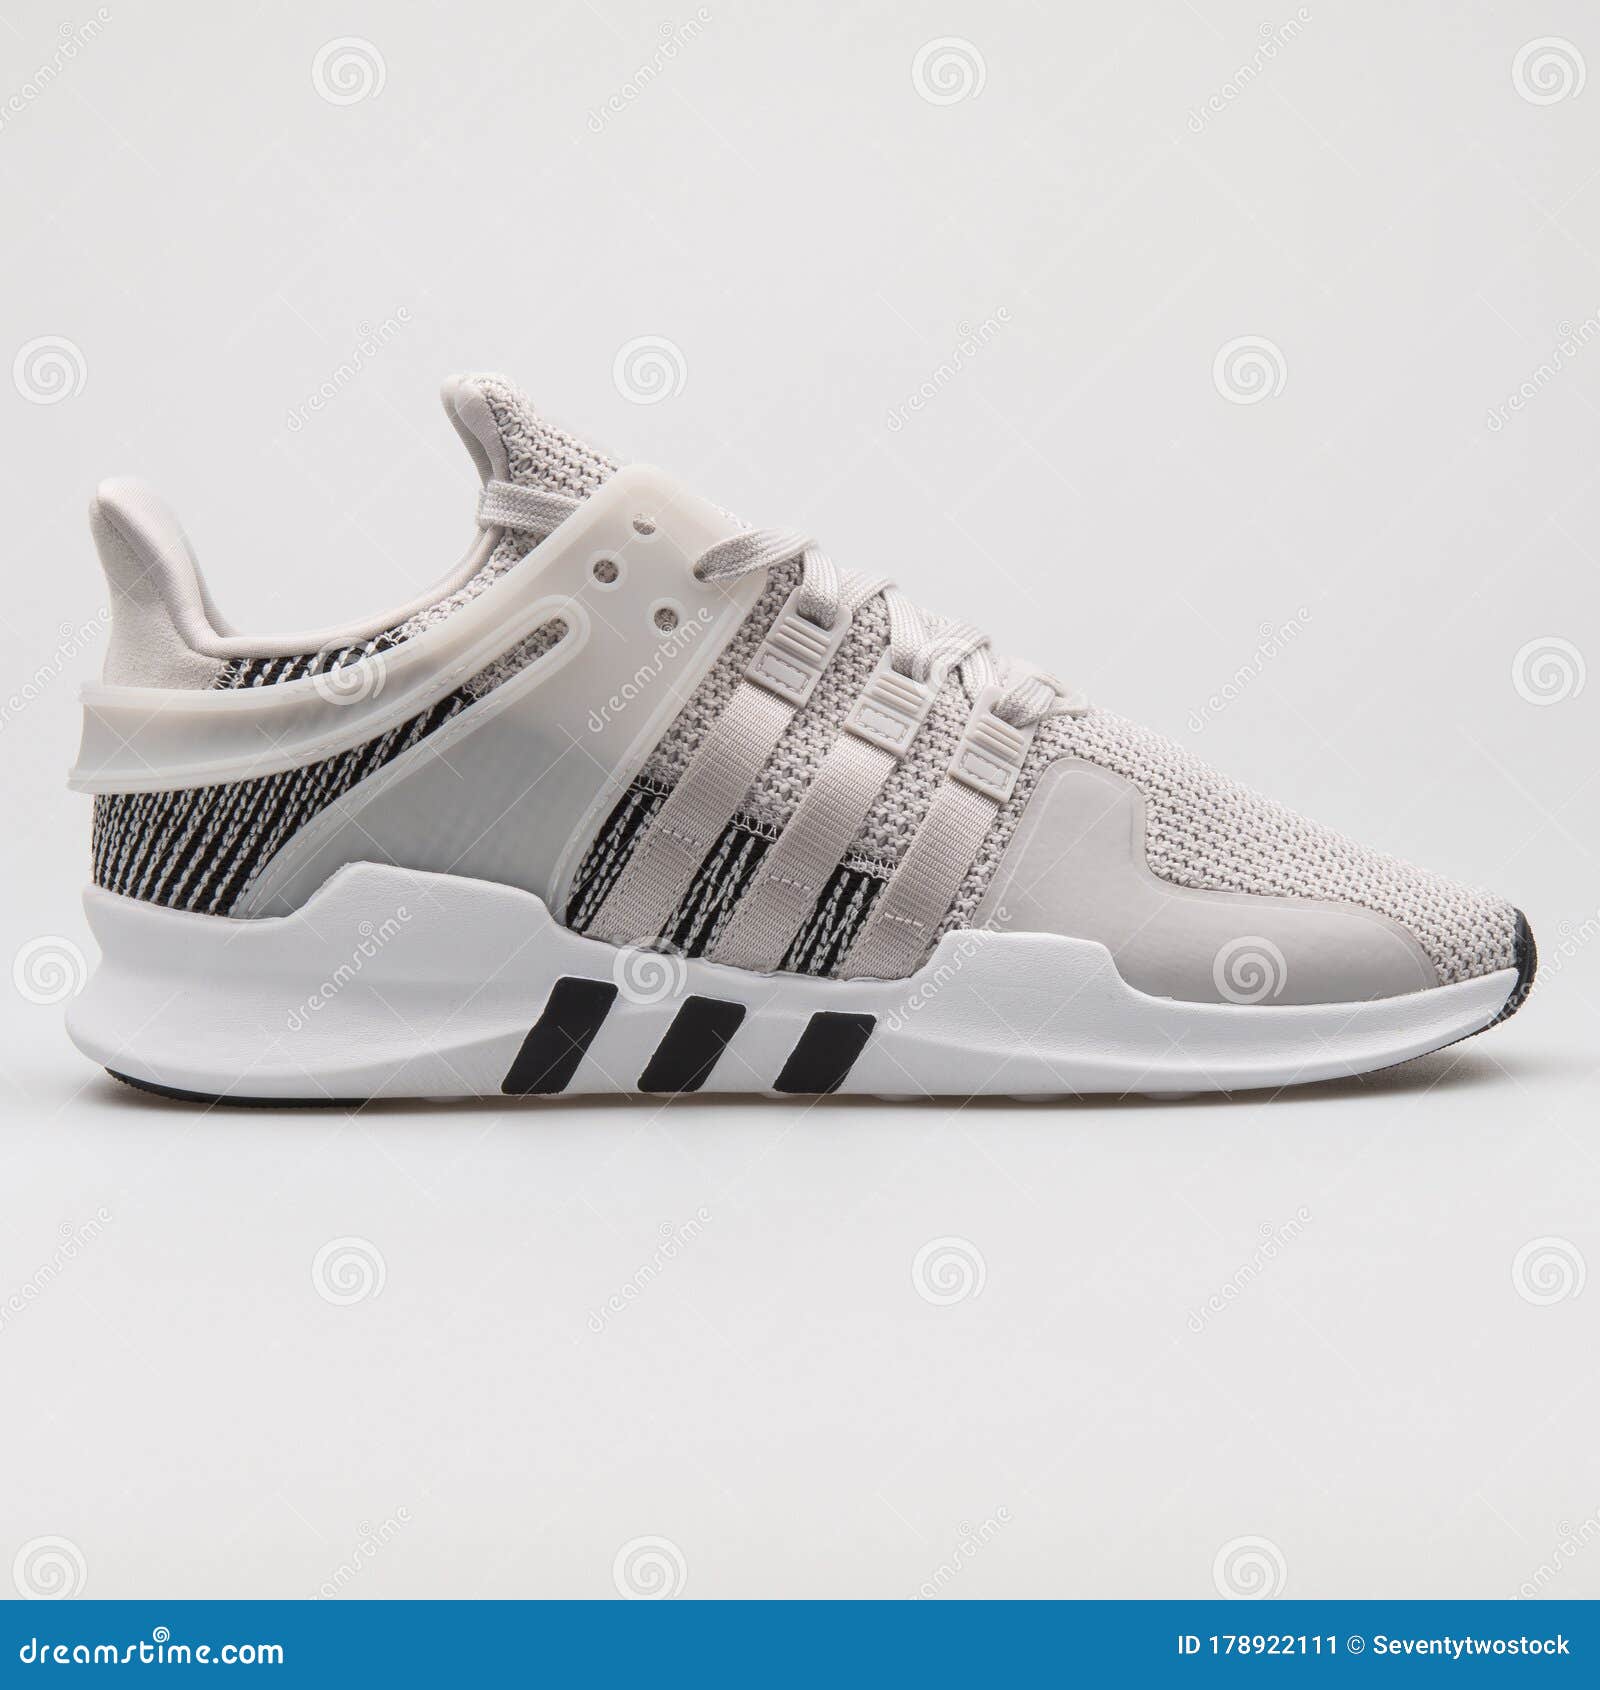 Adidas EQT Support White and Grey Sneaker Editorial Photo - Image of item: 178922111